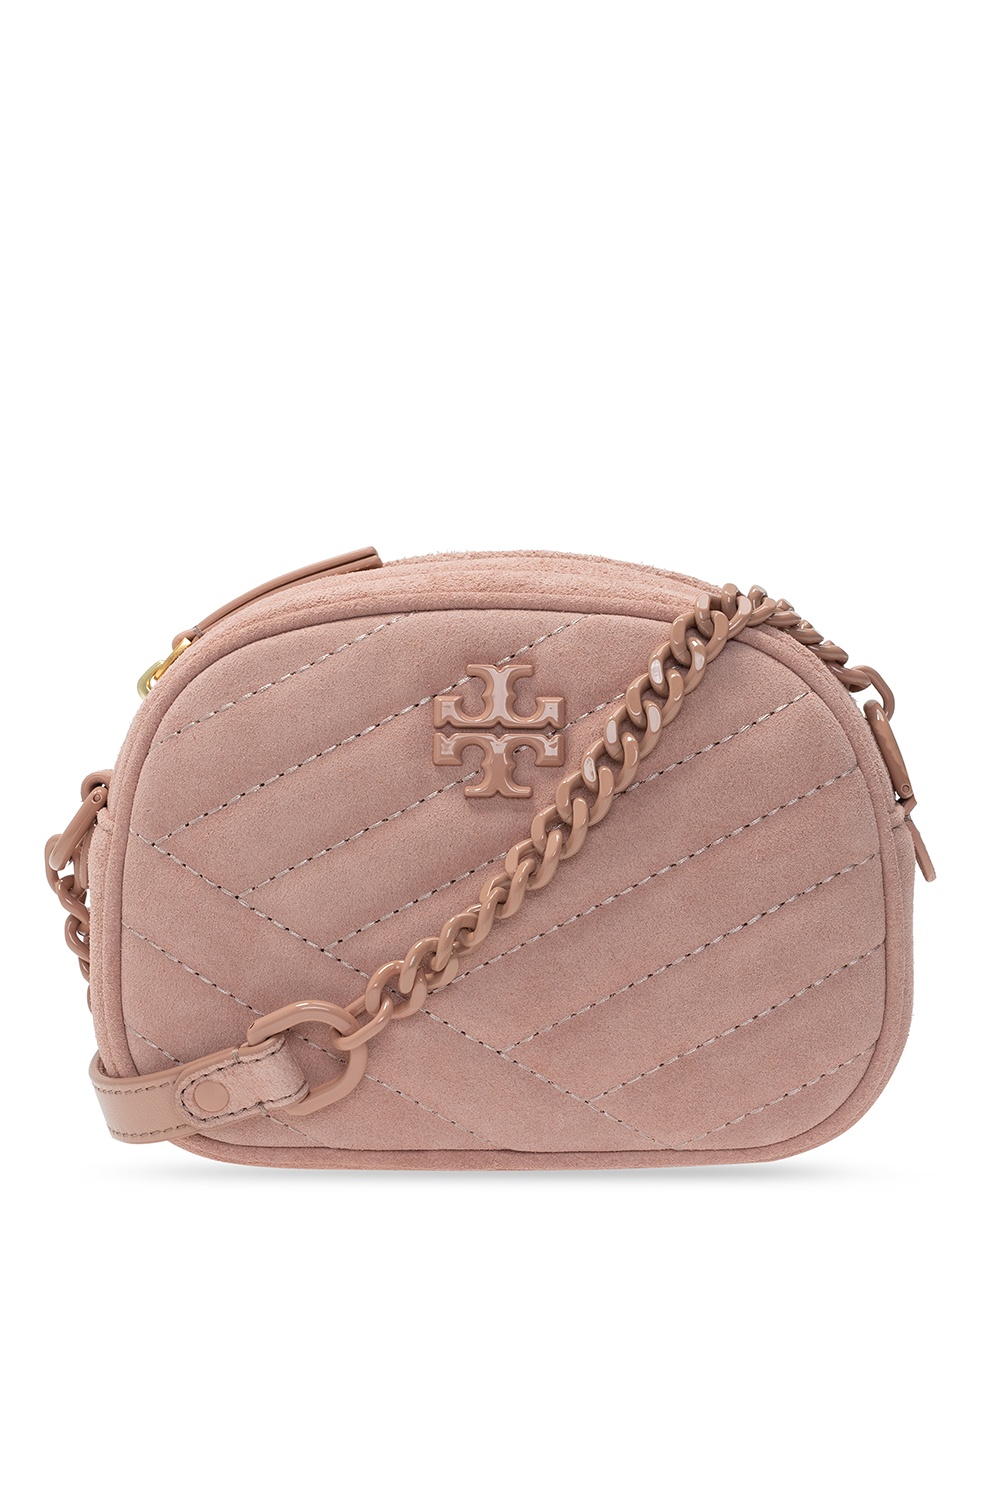 Tory Burch Sleeping Bag Quilted Leather Winter Booties